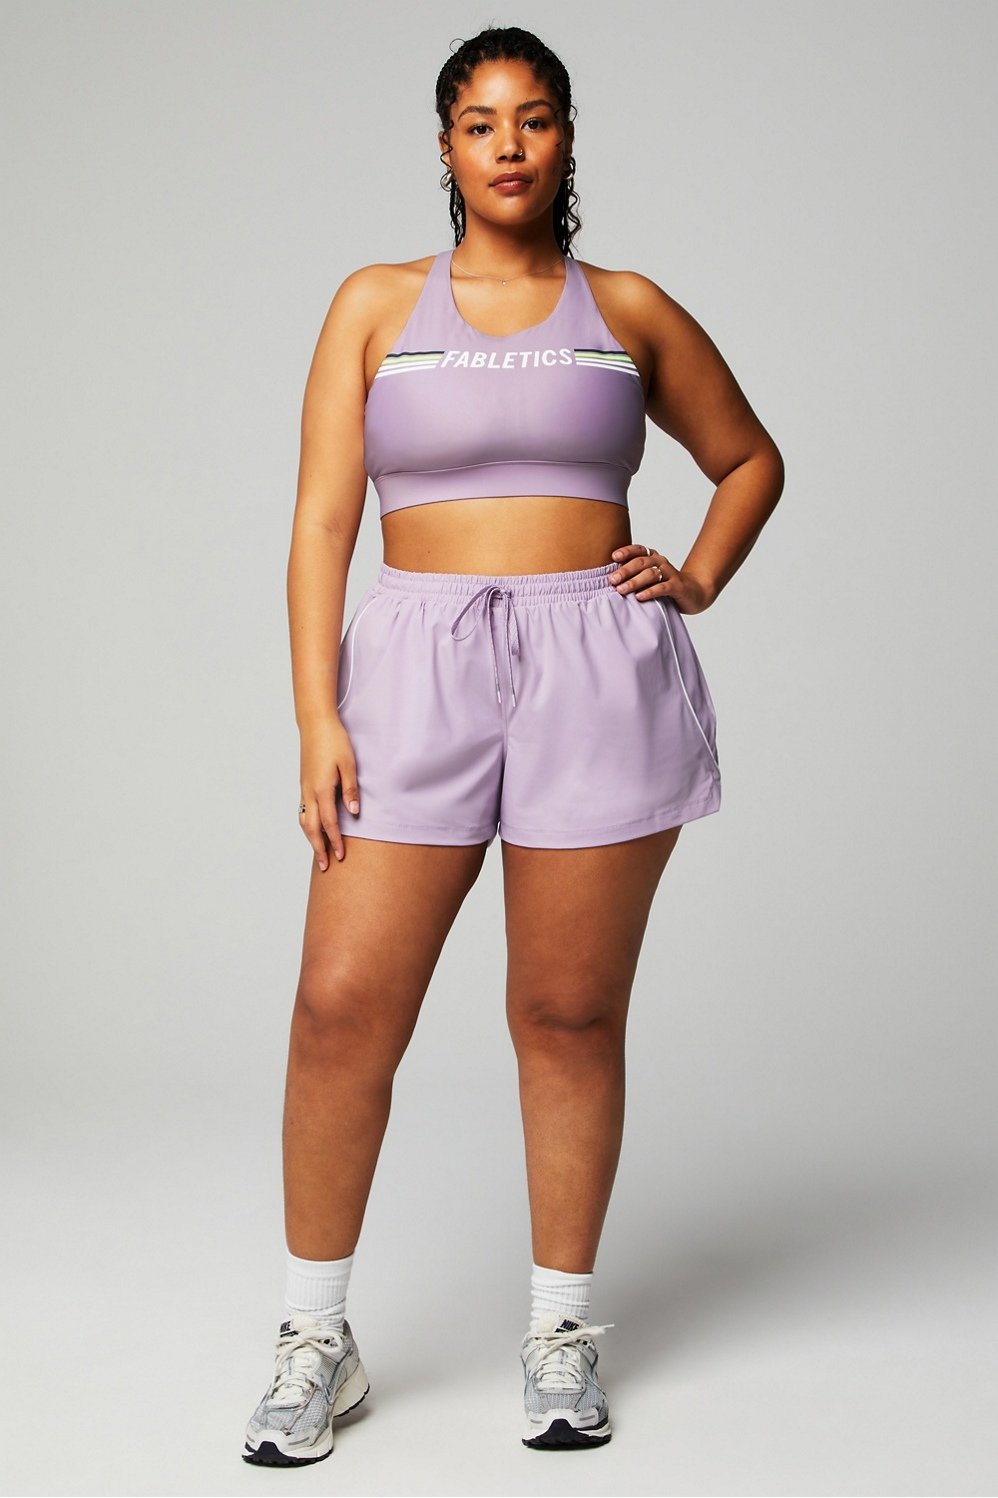 The Piped One Short 3 - Women's